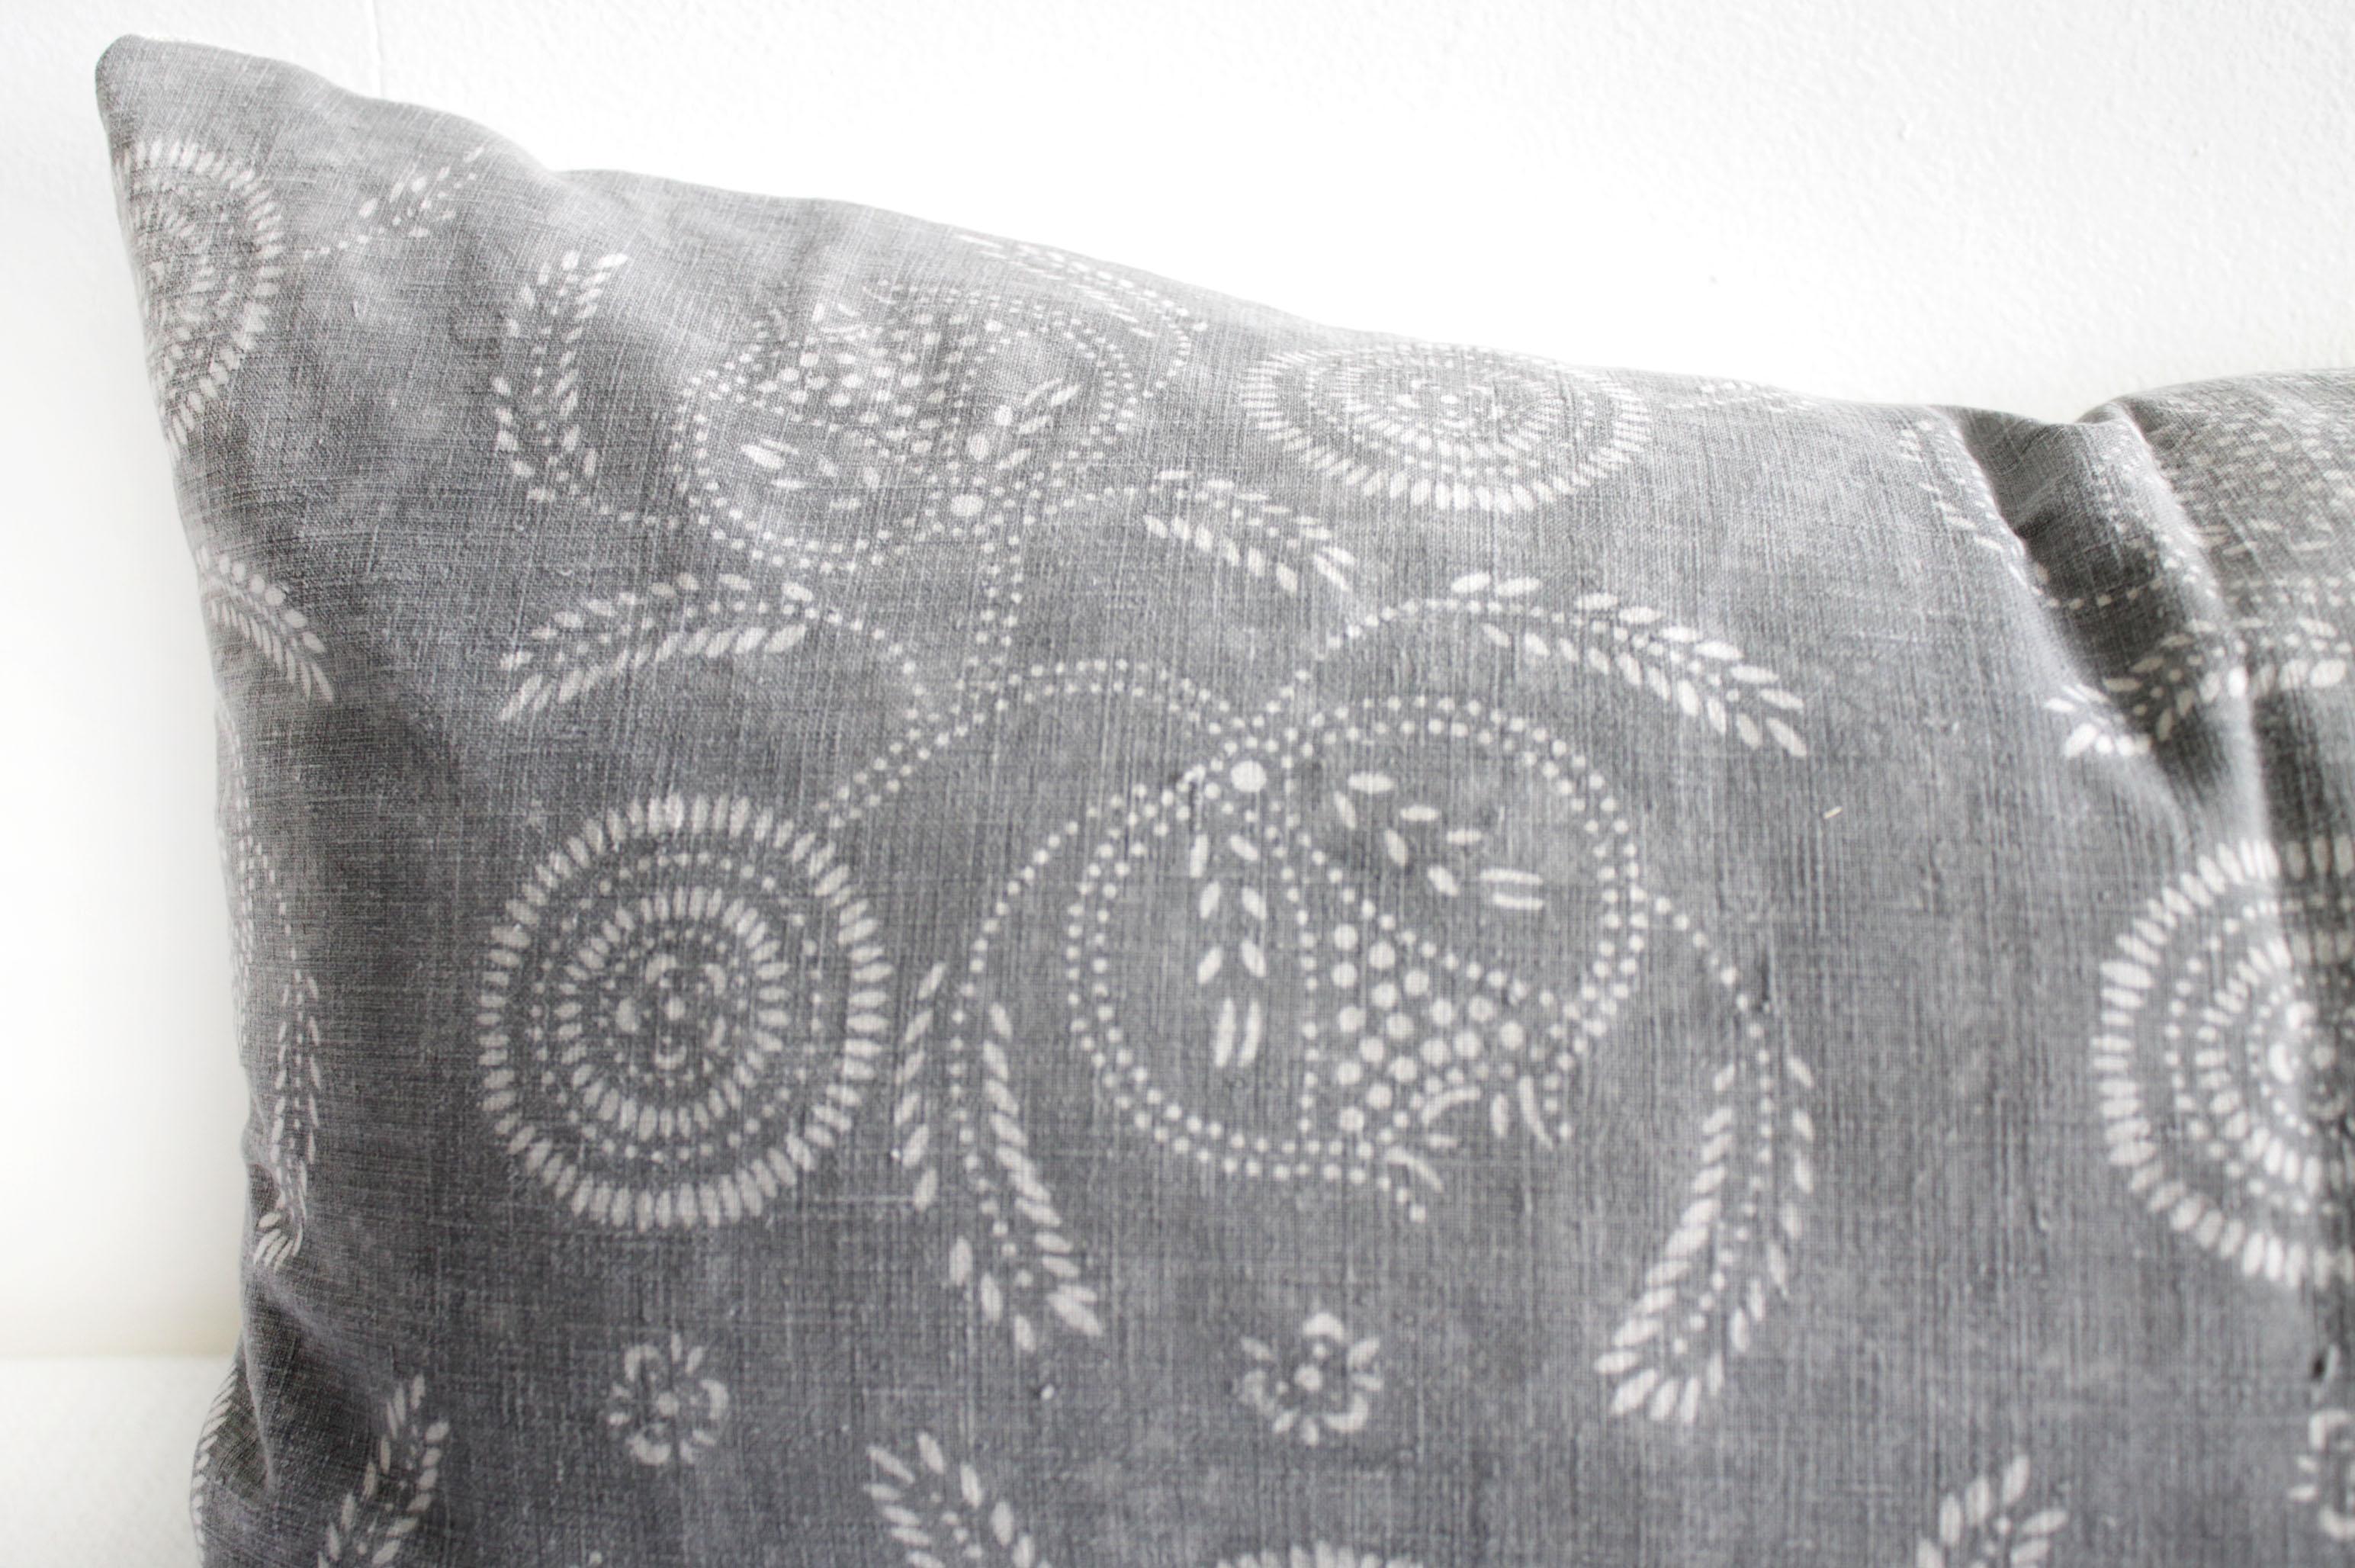 Vintage tribal gray and natural textile pillow
This beautiful pillow features a vintage textile face in a faded gray and soft white pattern. Our pillows are constructed with vintage one of a kind textiles from around the globe. Carefully